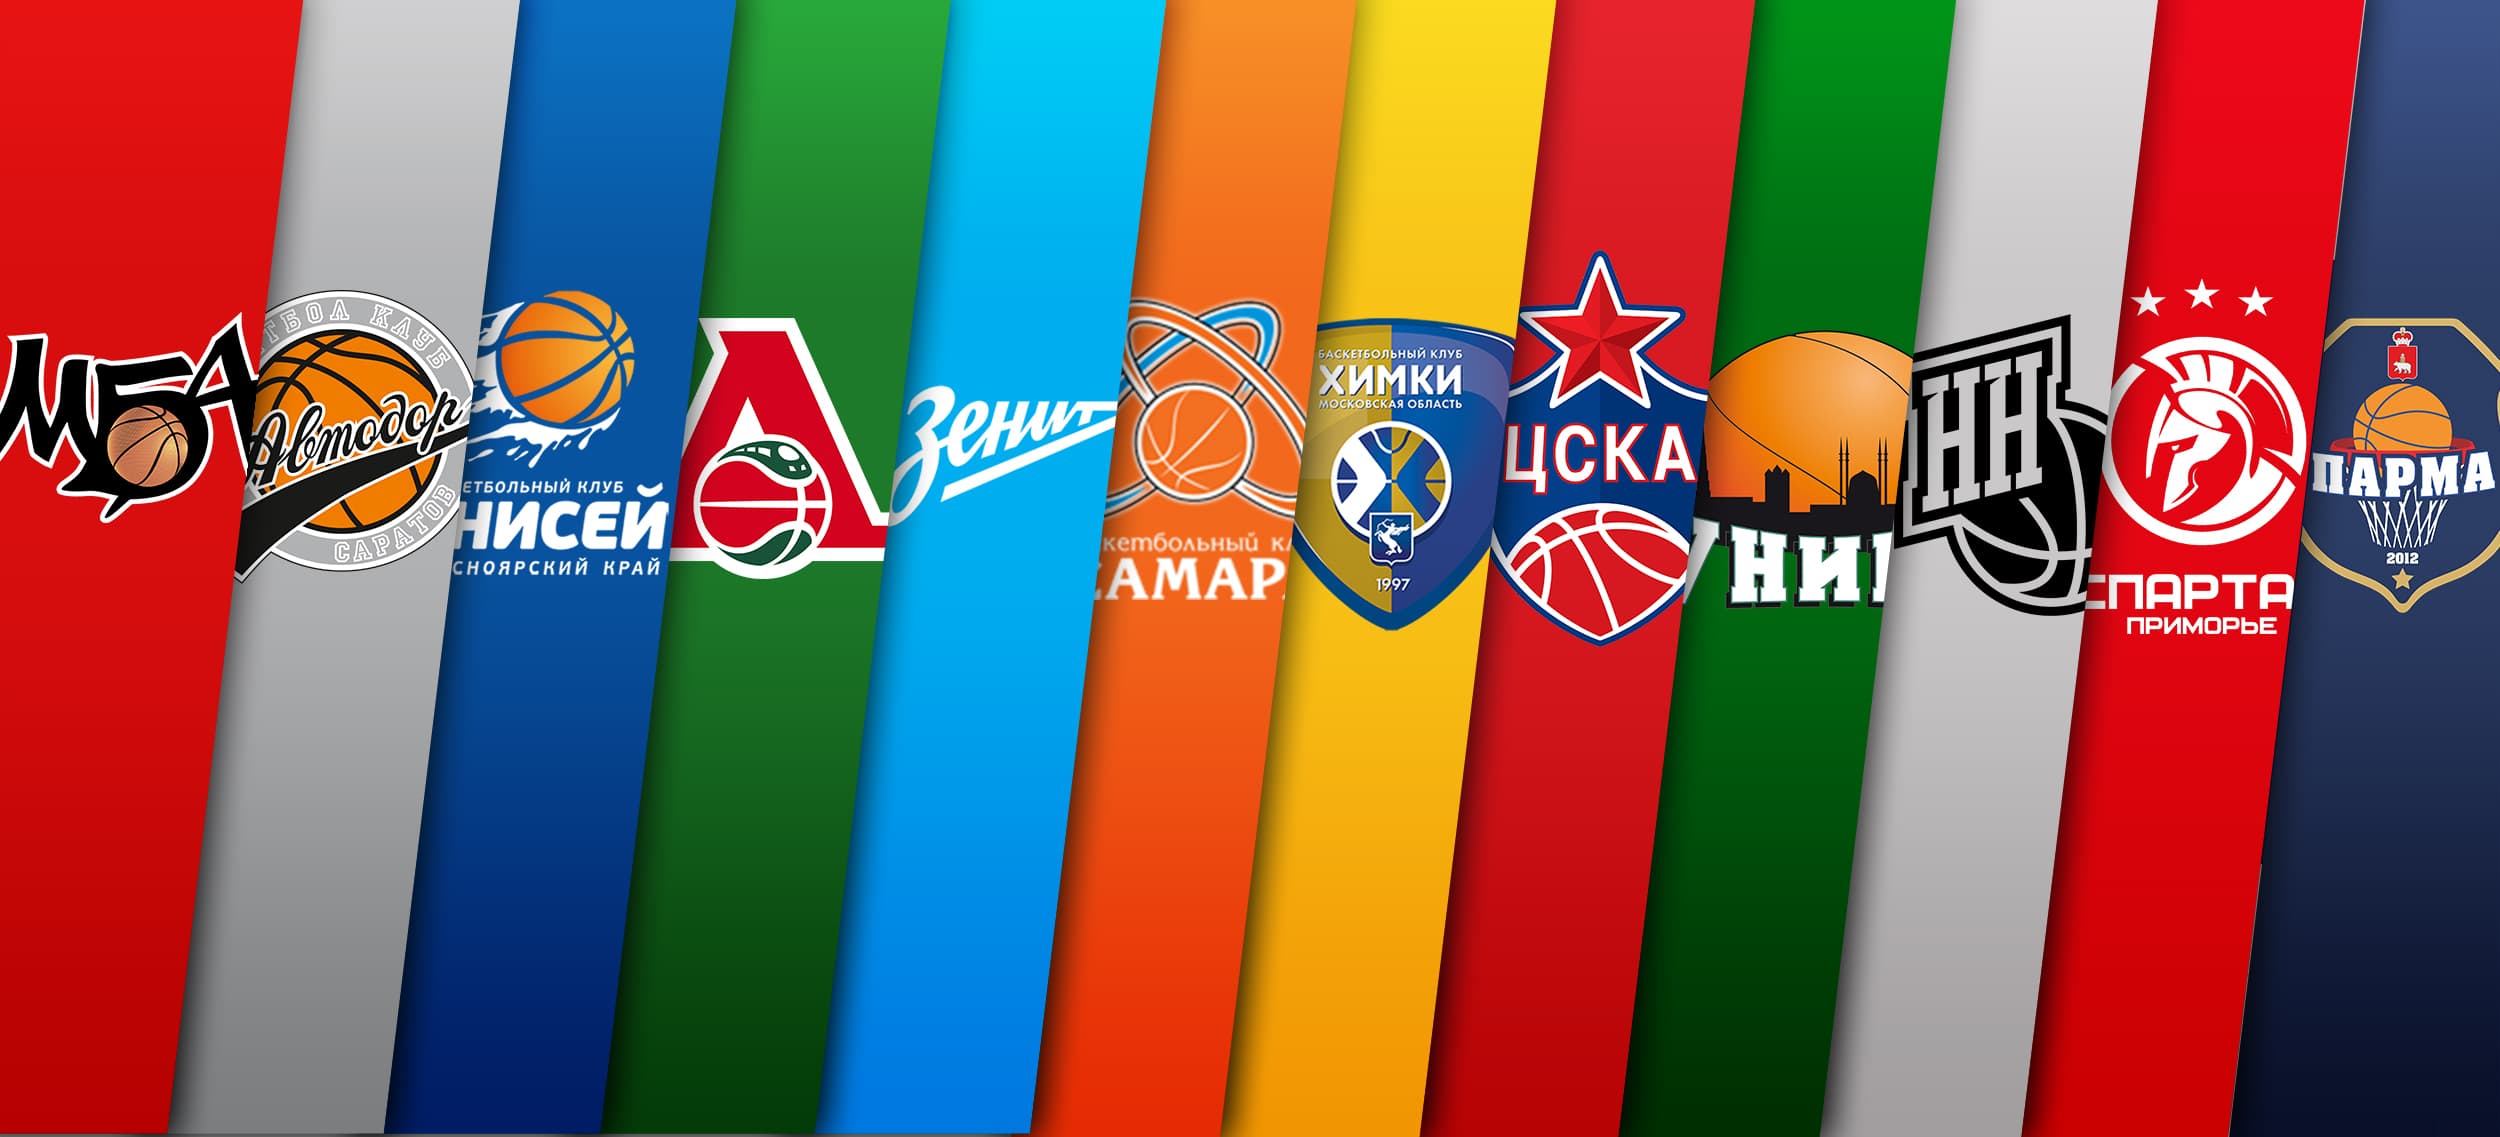 MBA-2 And Spartak-Primorye-2 Join VTB United Youth League